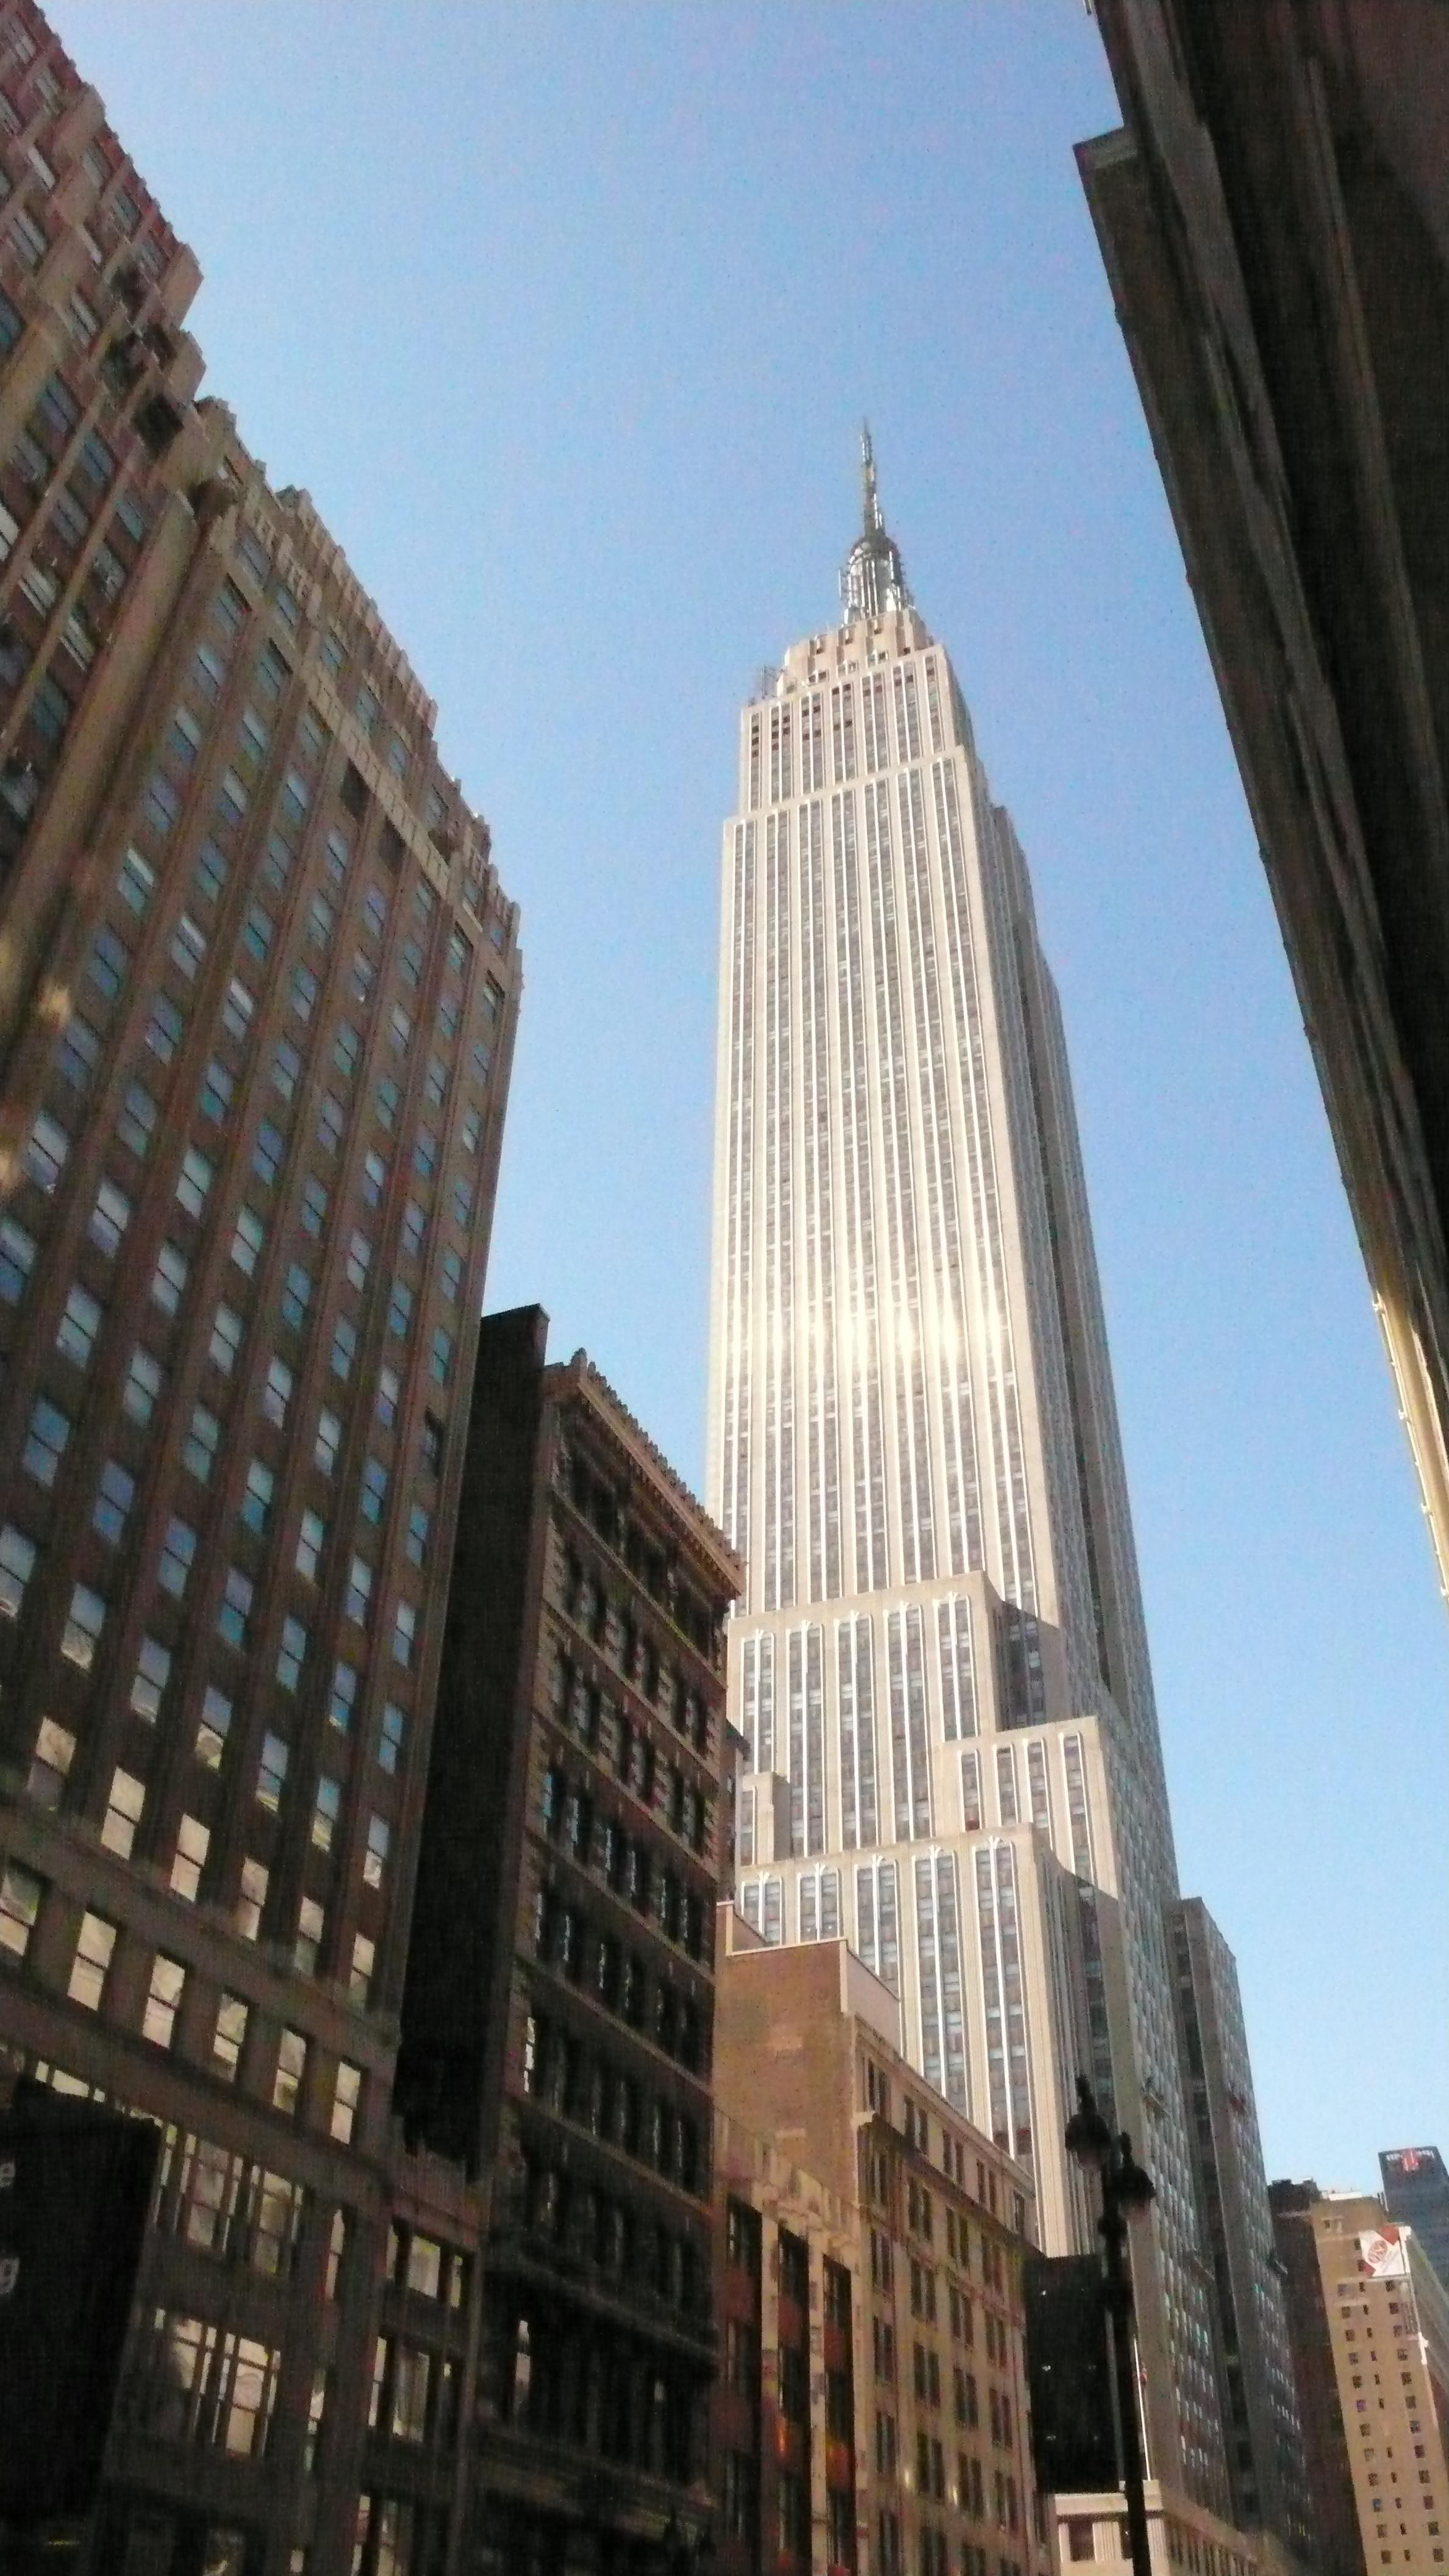 EMPIRE STATE BUILDING ON 5TH AVENUE